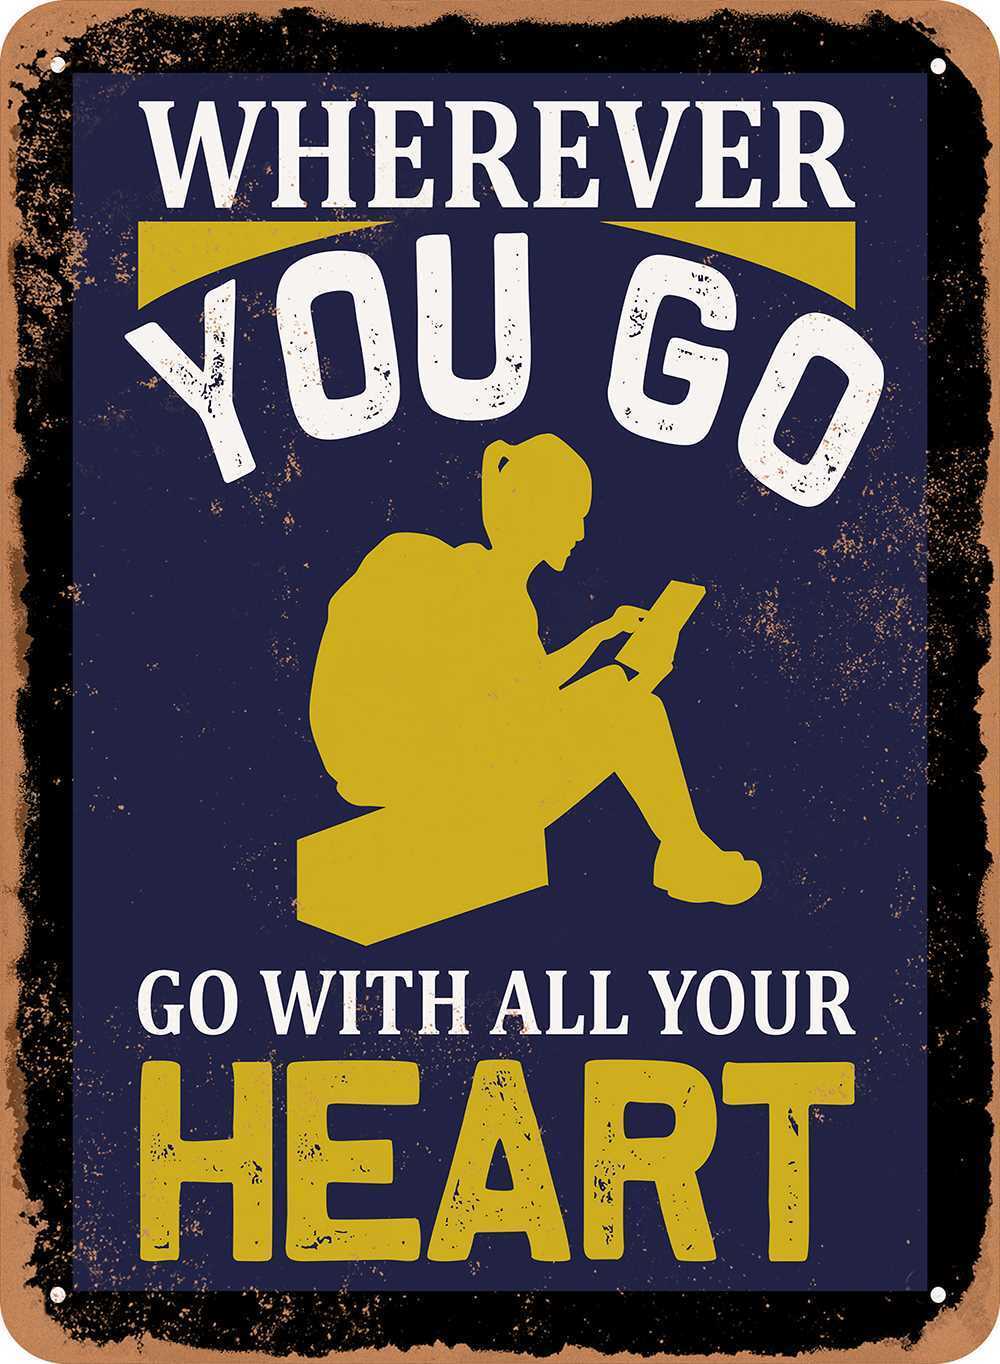 Metal Sign - Wherever You Go With All Your Heart - Vintage Look